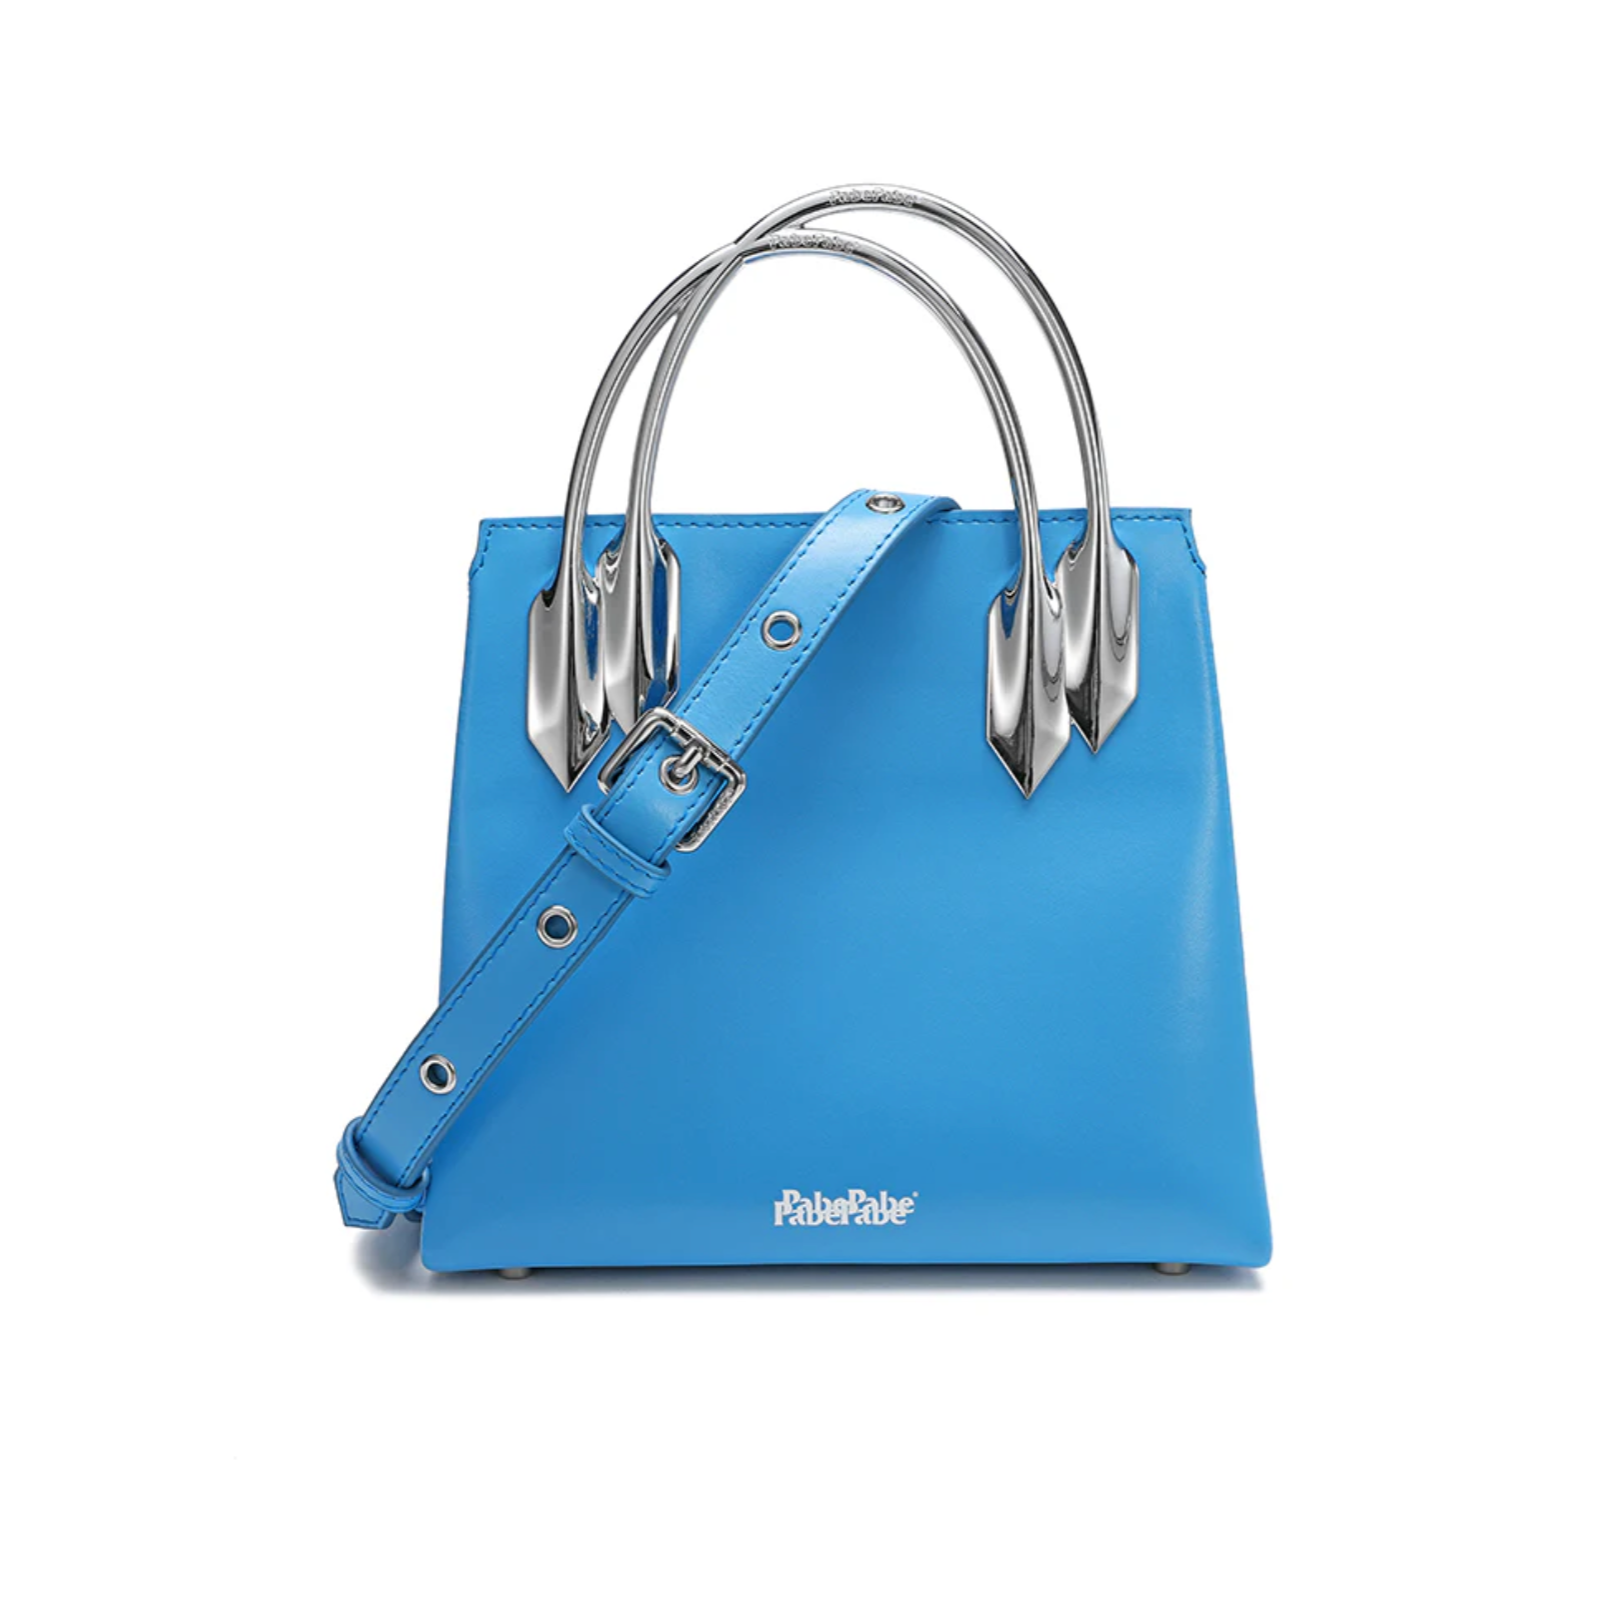 'Shadow' Blue Bag - PabePabe - ALSOLIKE